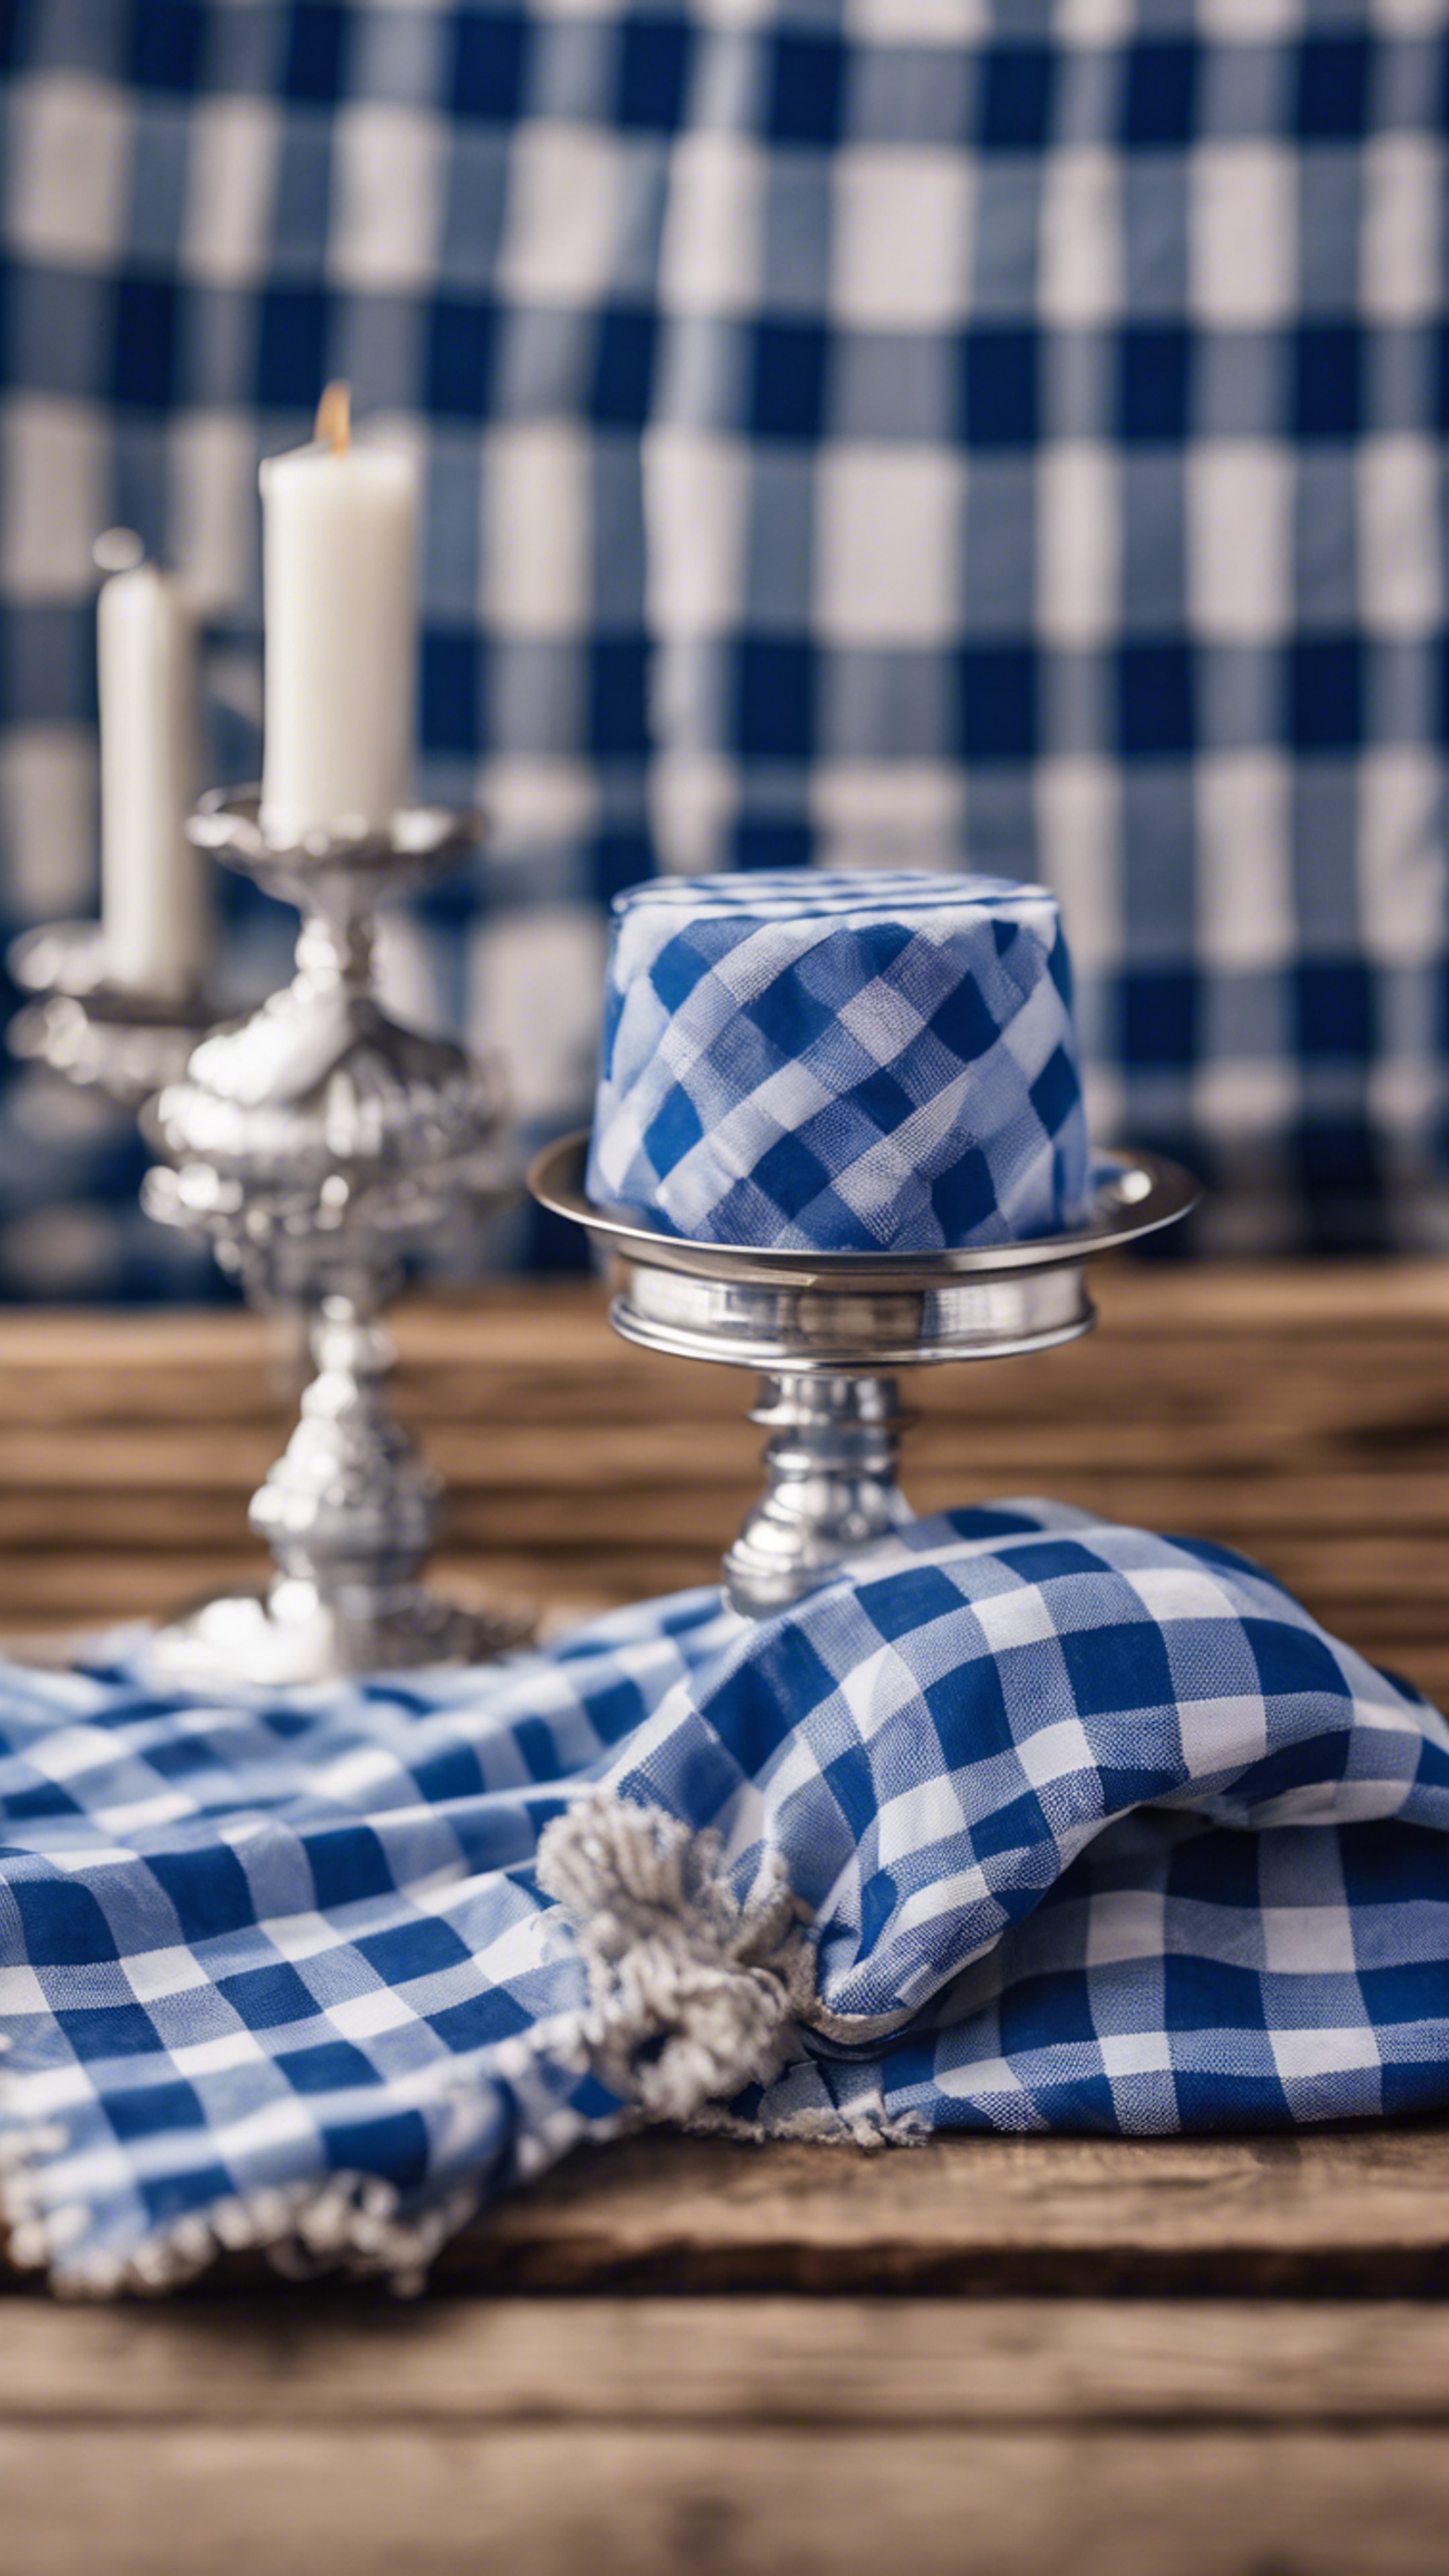 Classic blue checkered gingham fabric draped over a wooden table with a silver candelabra, evoking a preppy picnic scene. 벽지[5483729deeeb4e2a9f91]